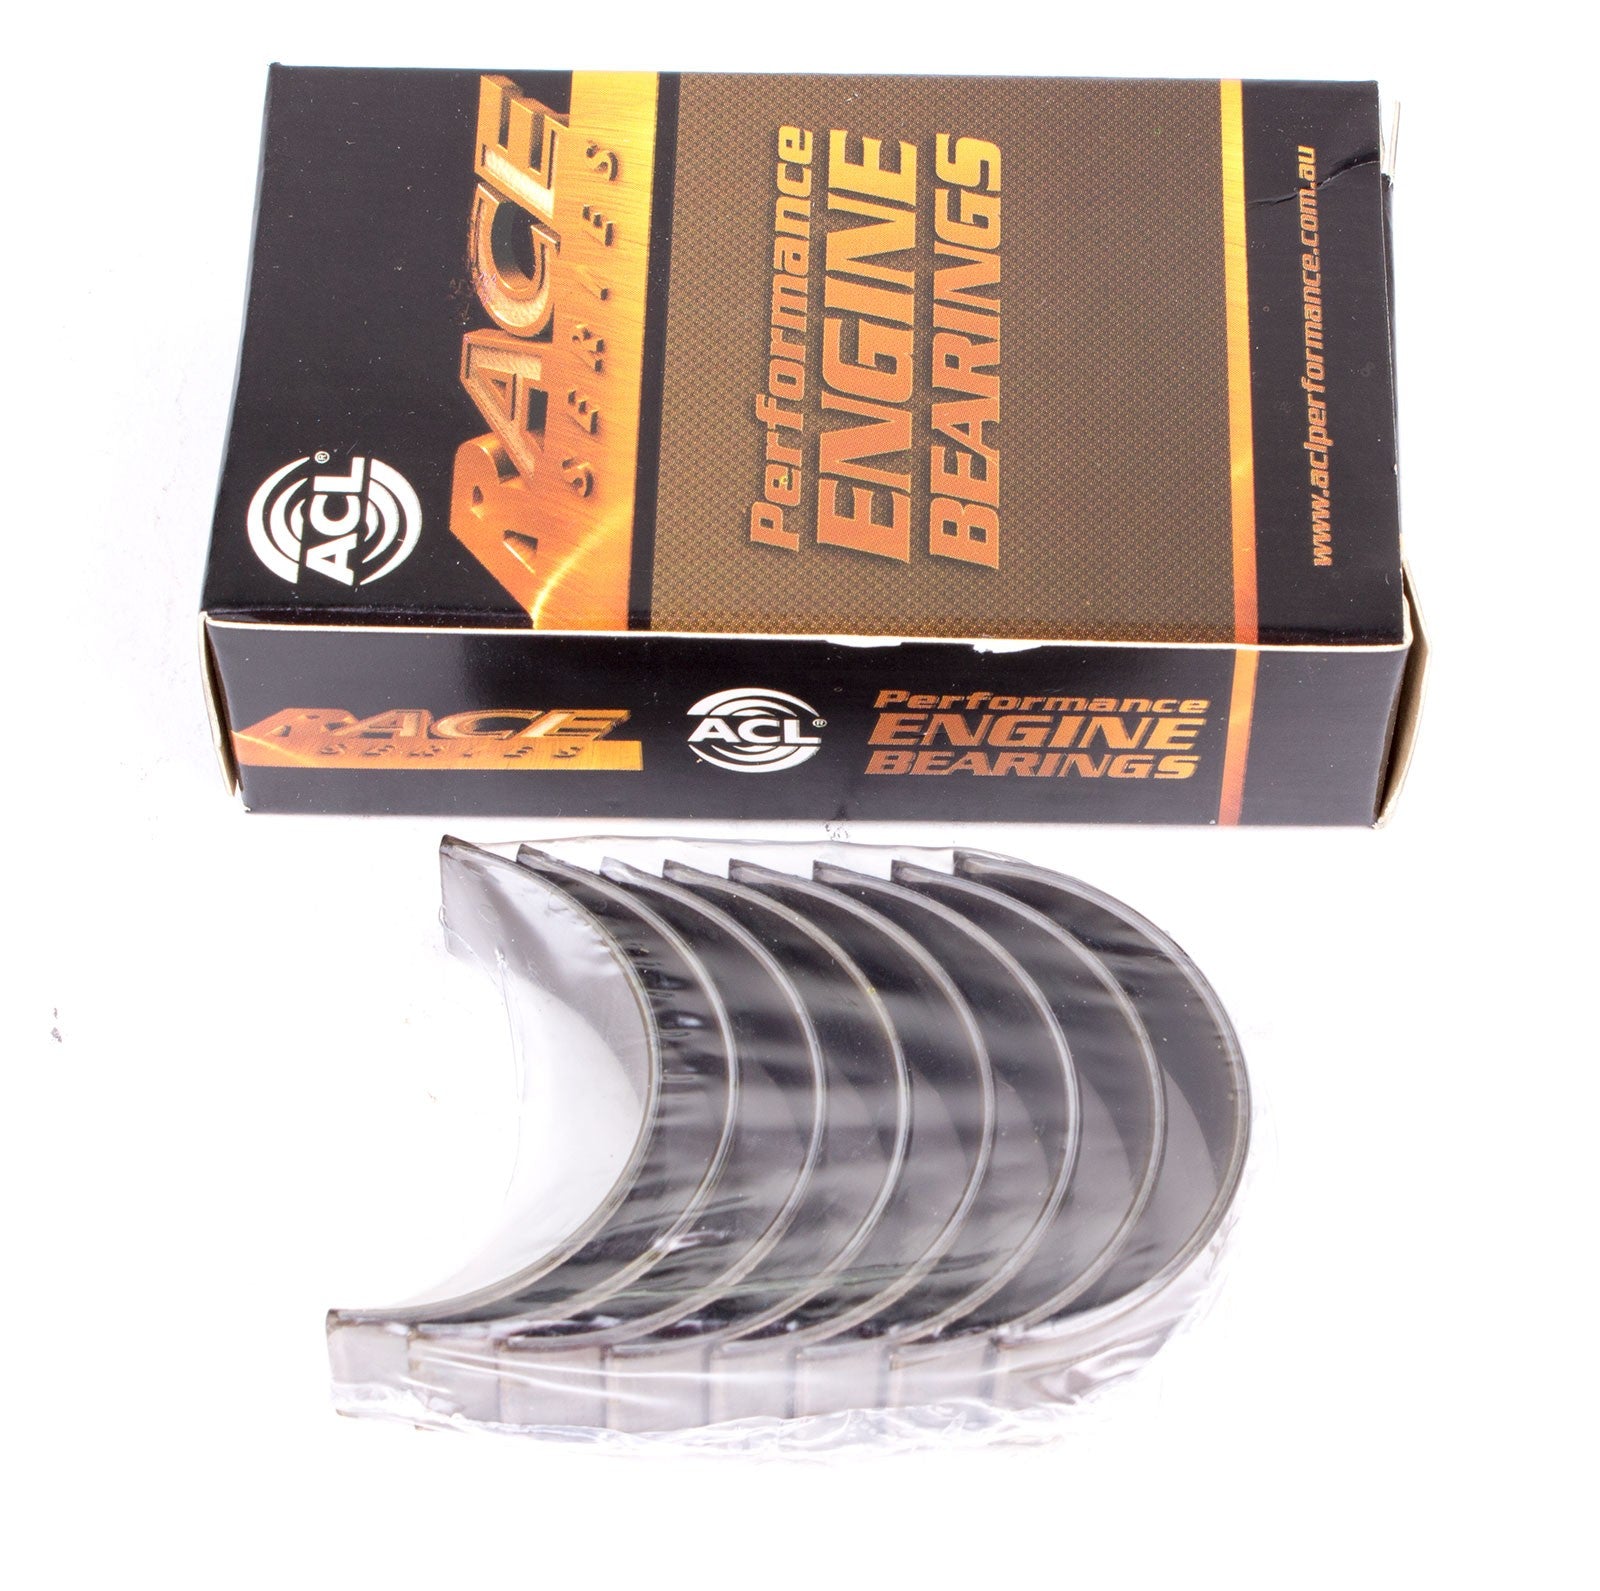 ACL 5M8434H-.025 Main bearing set (ACL Race Series) Photo-0 